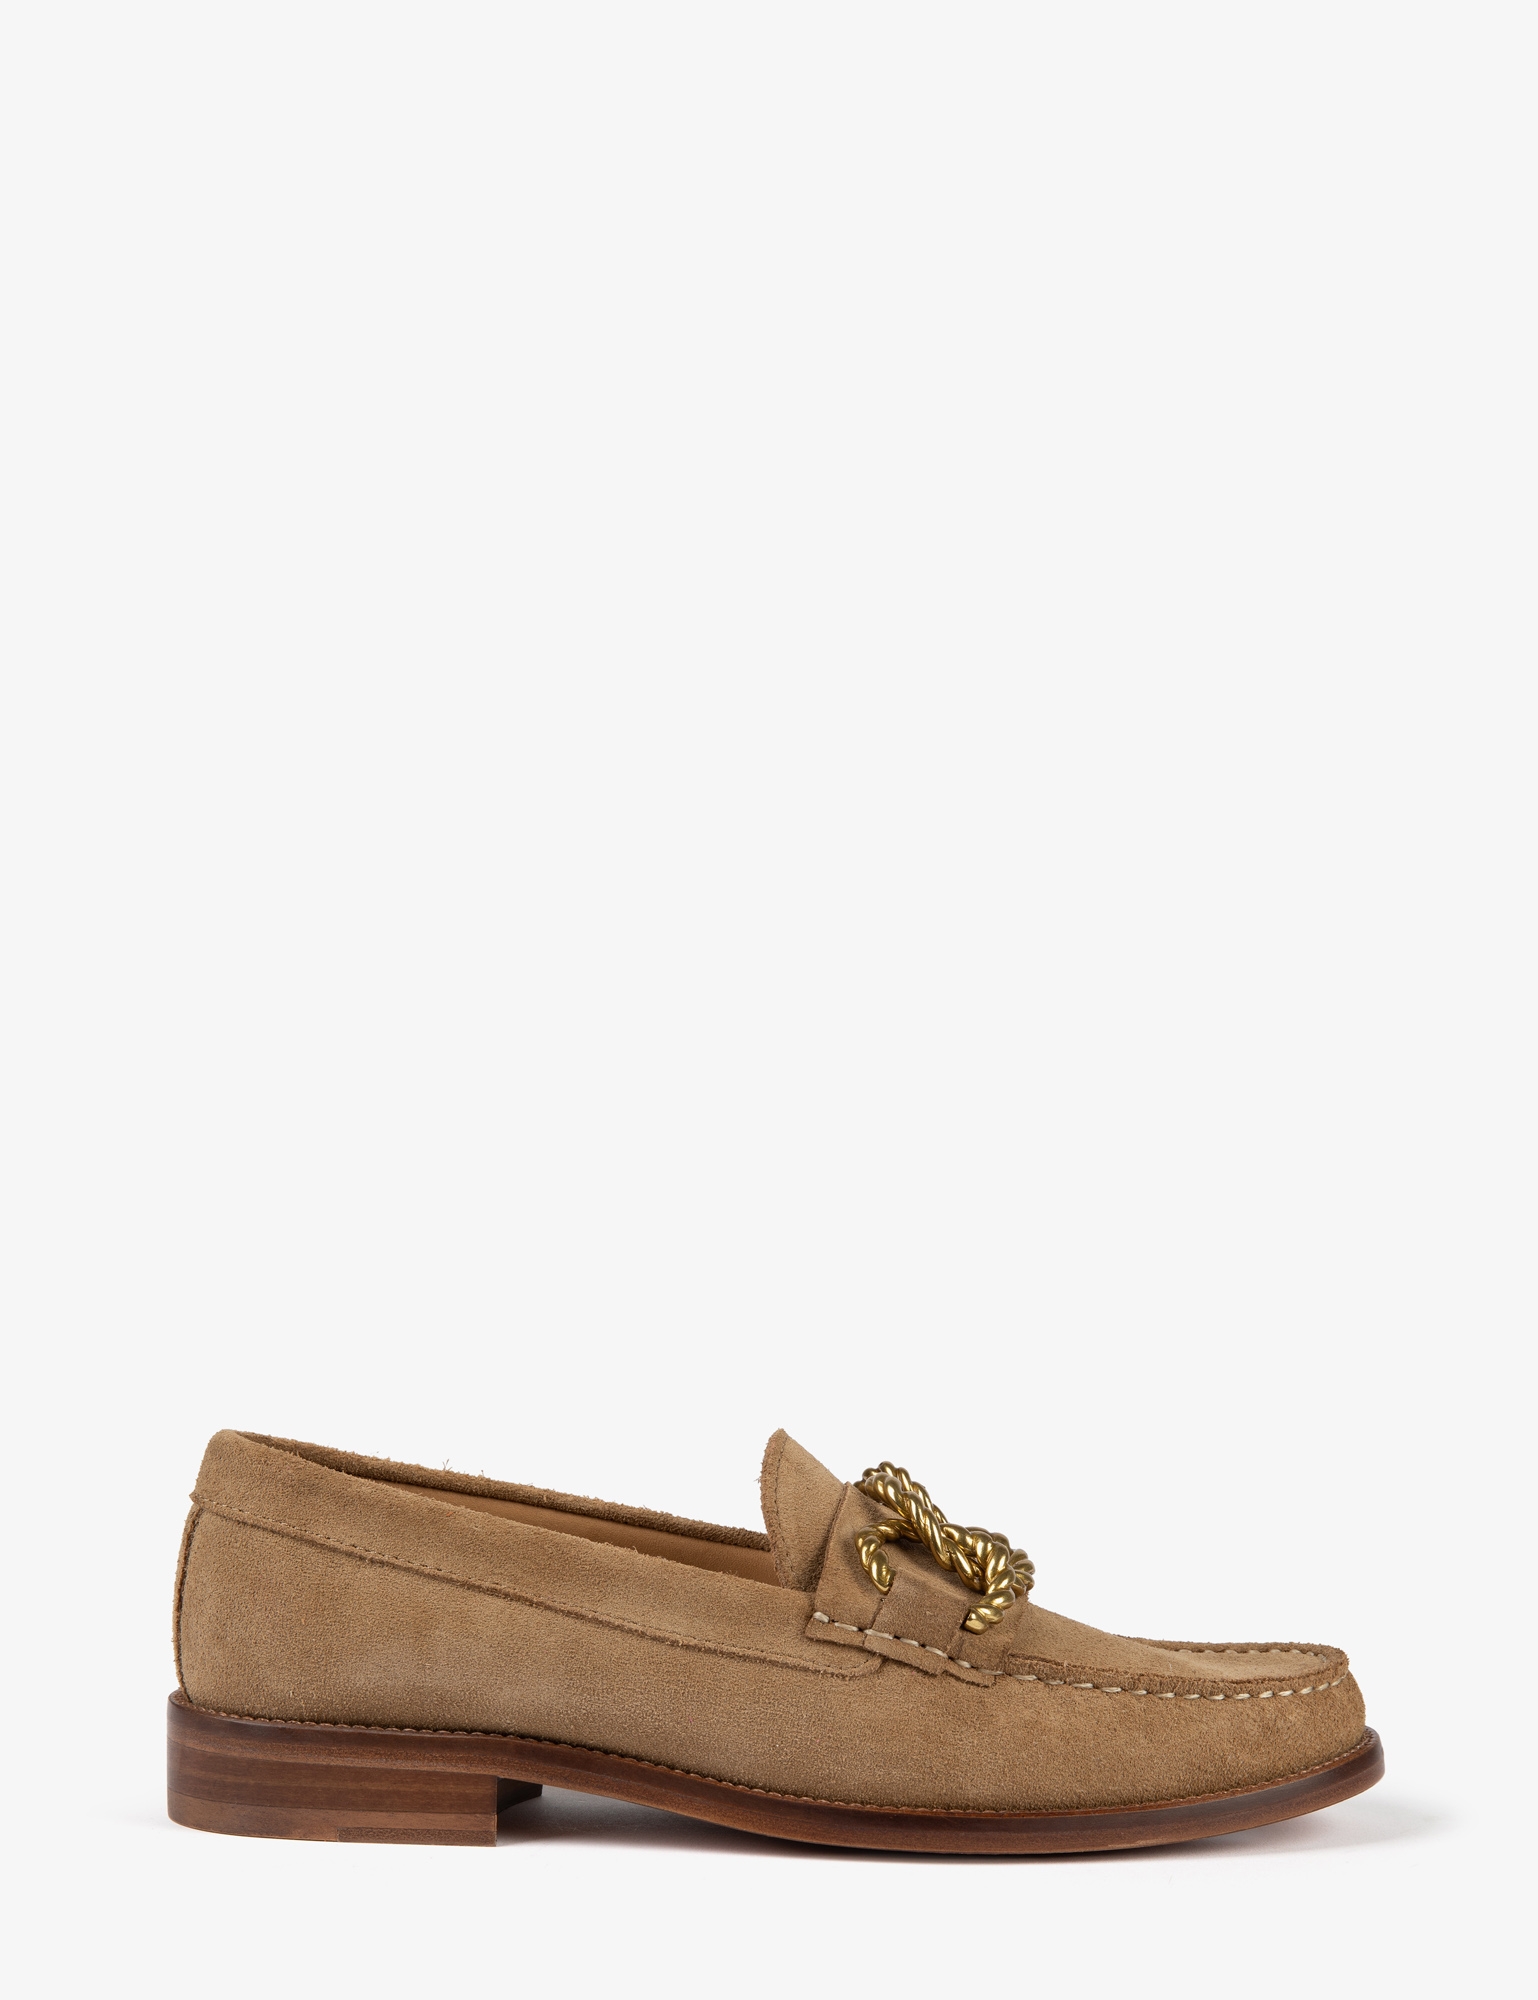 Braided Barley Suede Loafer - Camel| Women Shoes | Penelope Chilvers